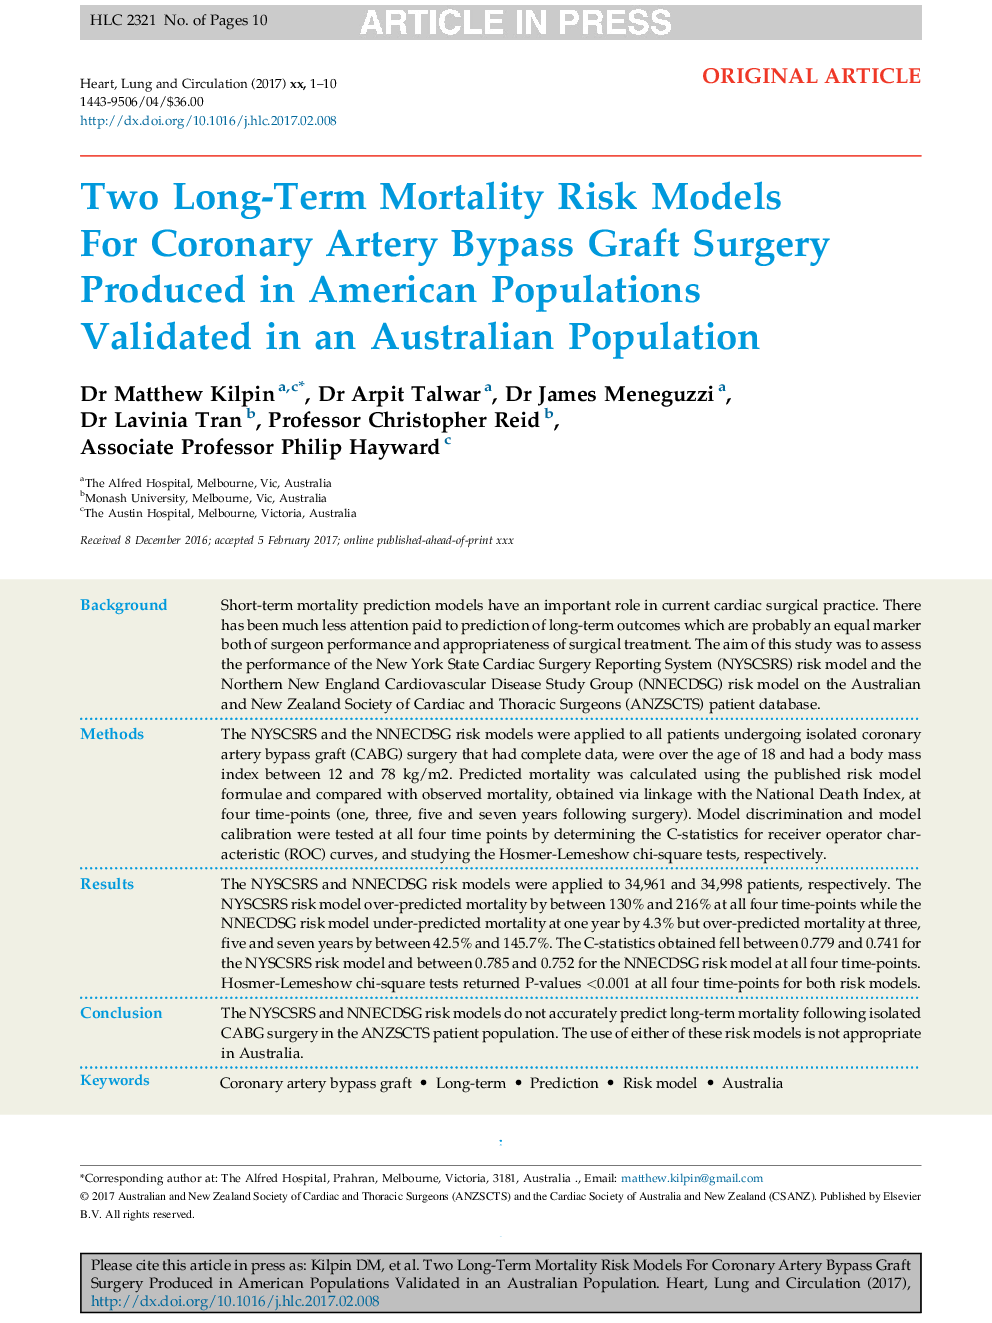 Two Long-Term Mortality Risk Models For Coronary Artery Bypass Graft Surgery Produced in American Populations Validated in an Australian Population